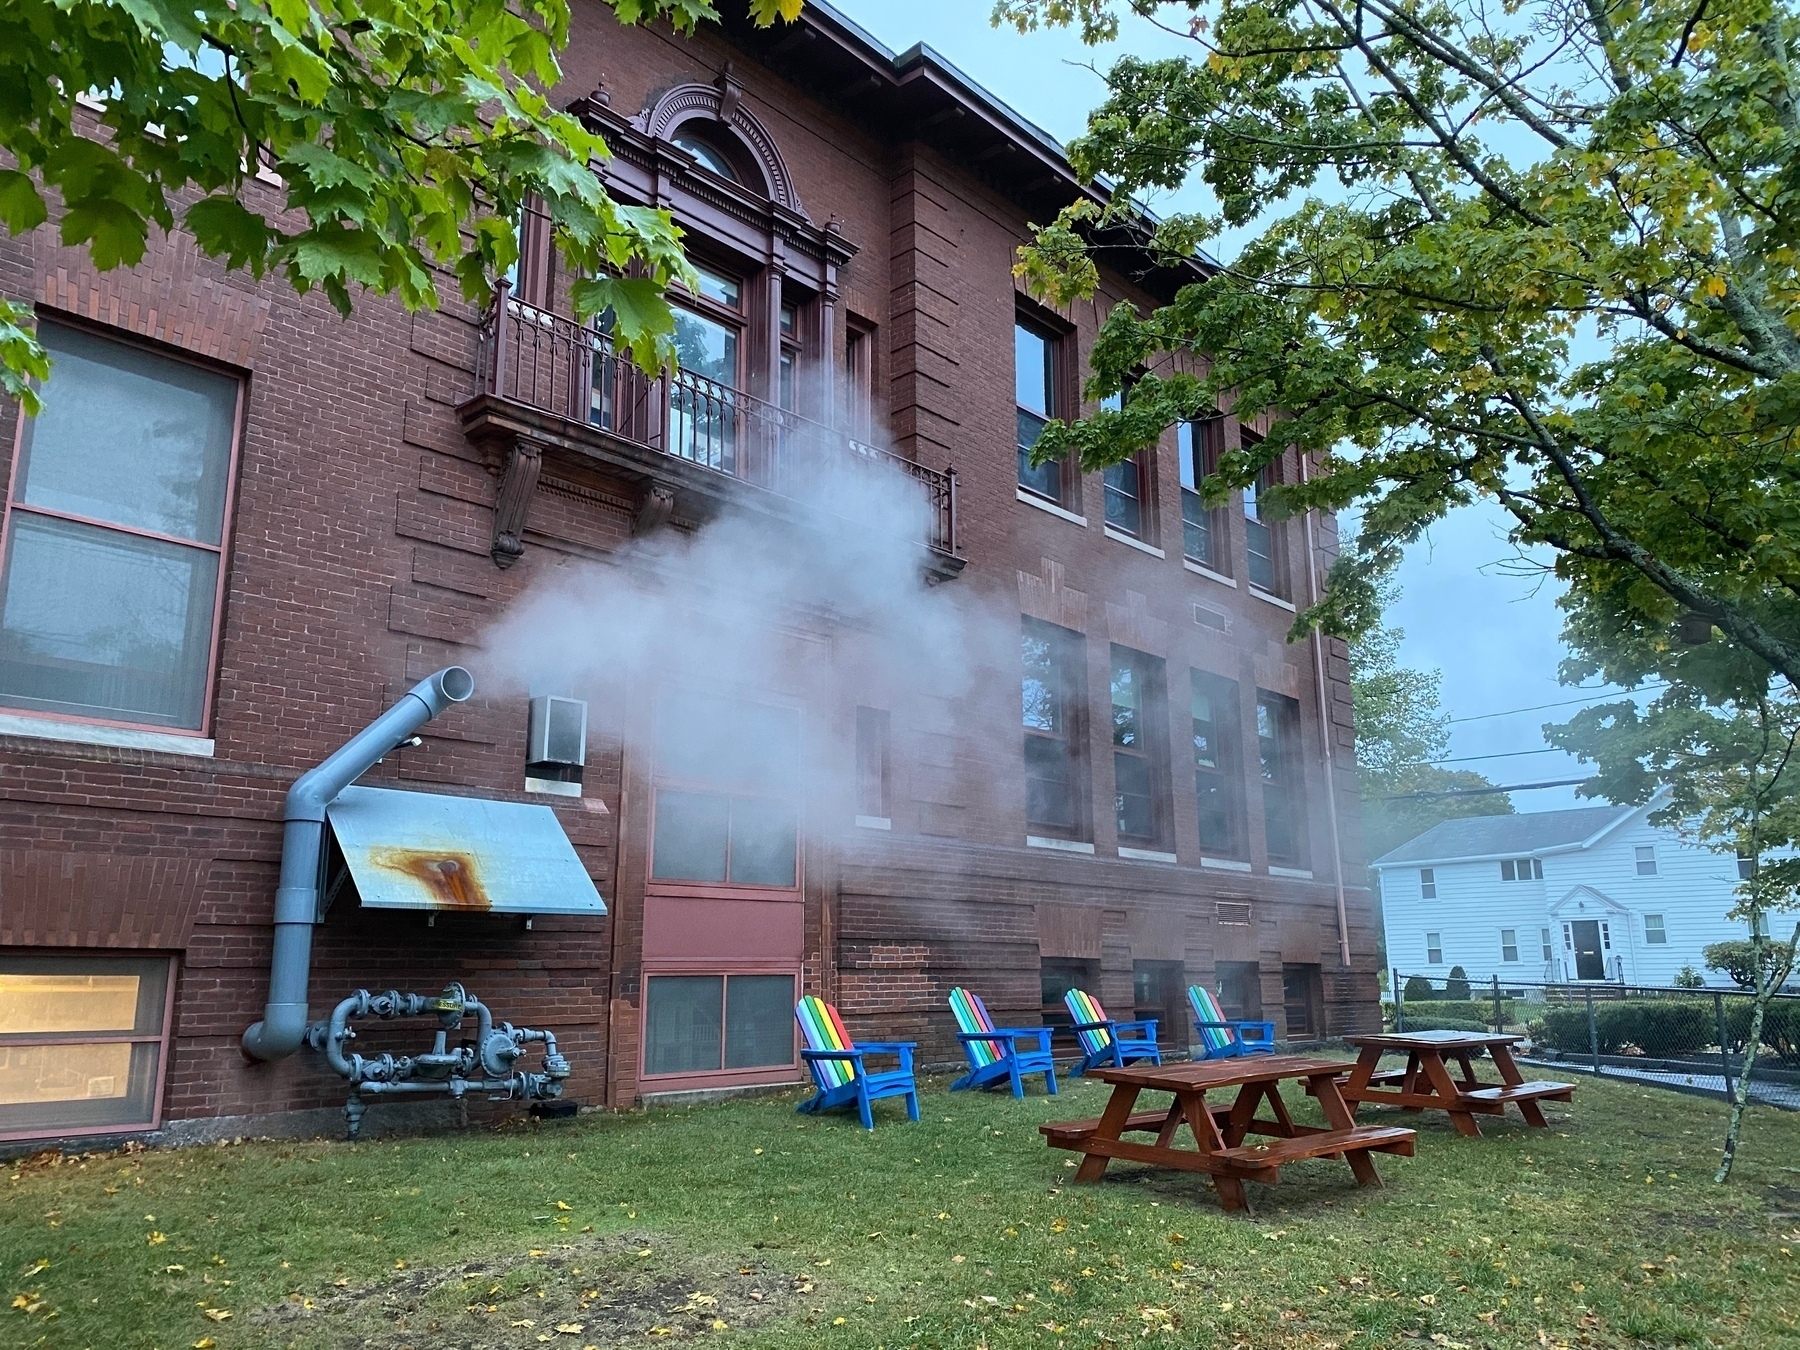 The side of a brick building with steam escaping from some pipes on the side, with picnic tables and adirondack chairs chairs on the lawn in front.